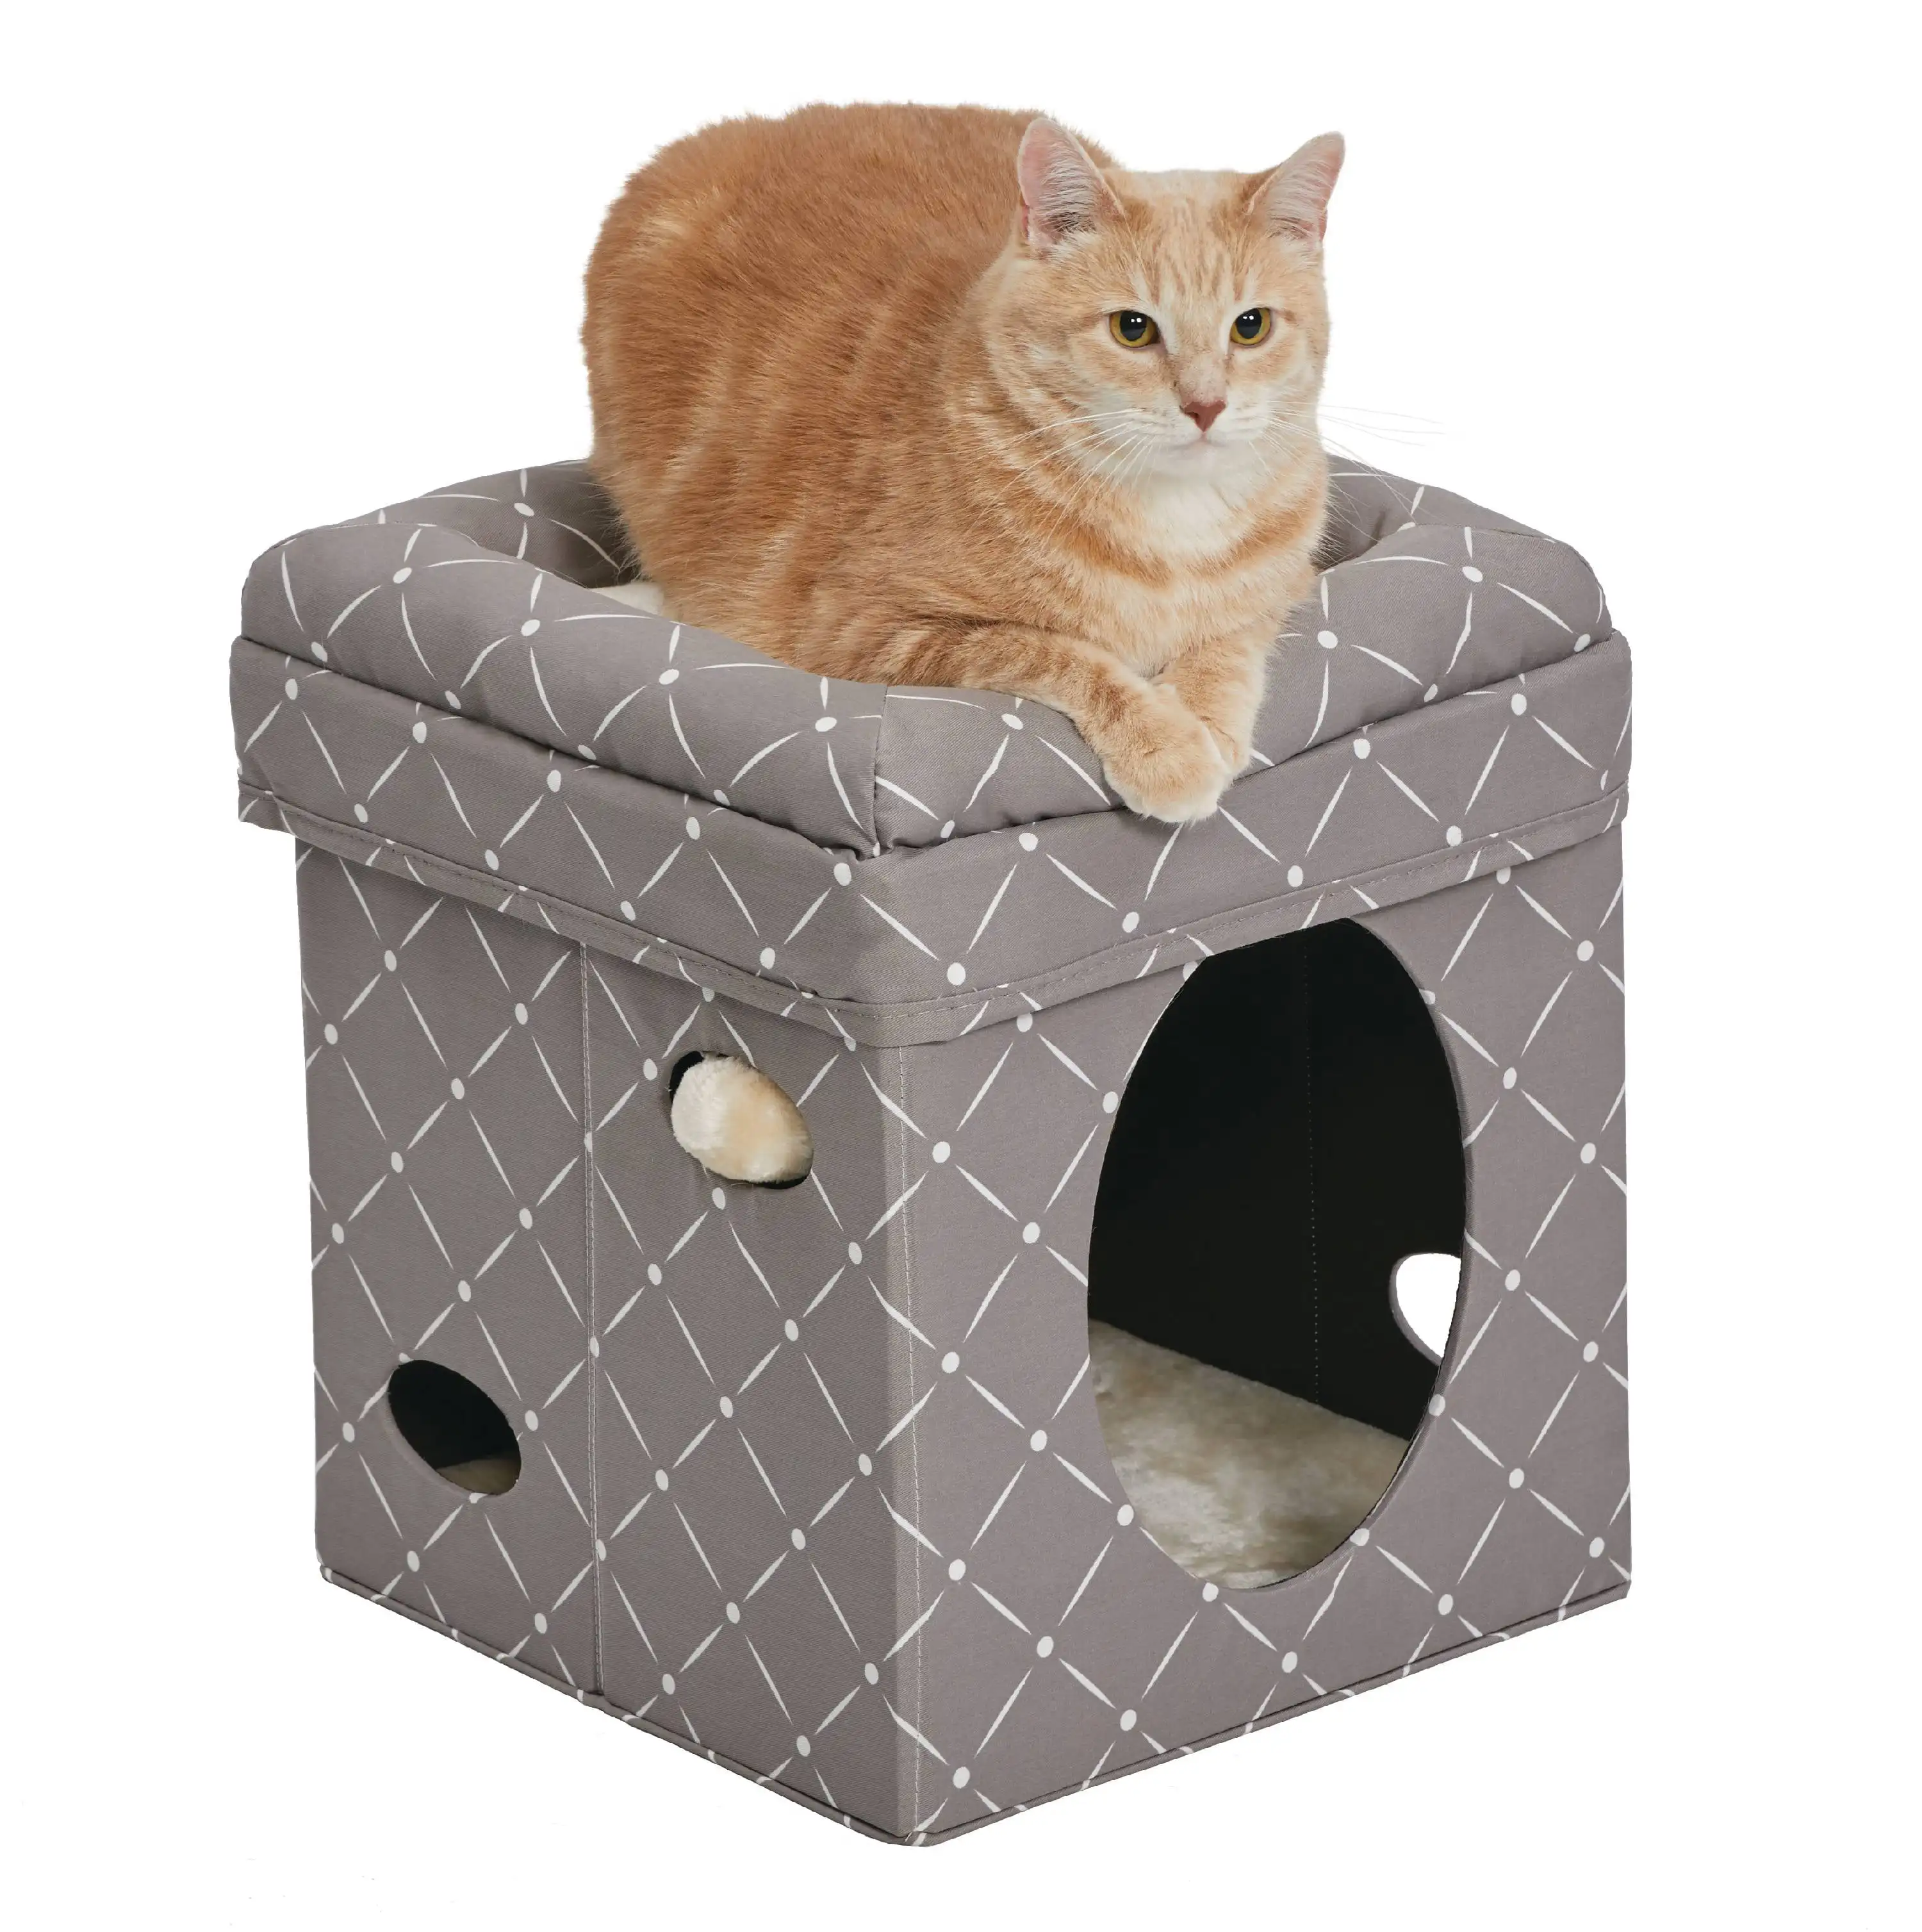 

CURIOUS CUBE CAT BED GEO MSHRM Soft Sleep House Cushion Pet Product Accessories